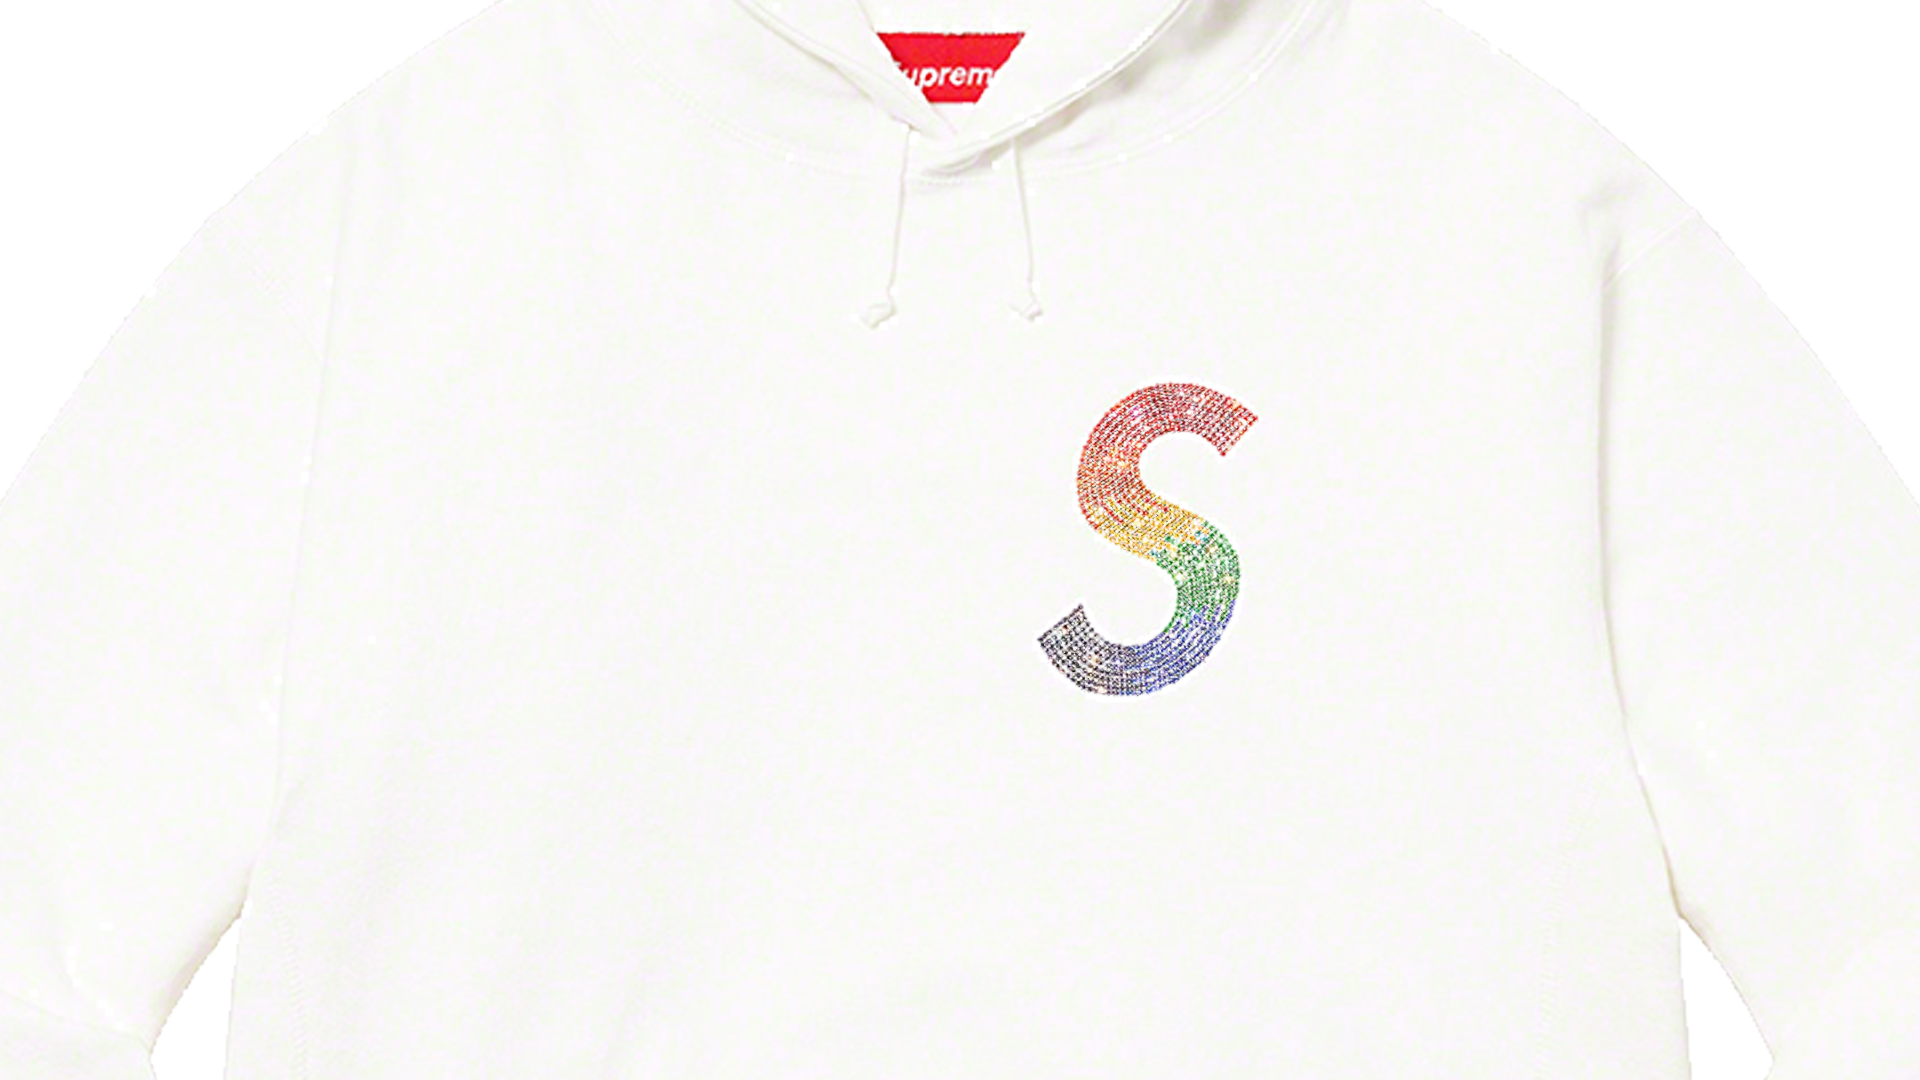 Swarovski Crystal Pieces Dropping Soon at Supreme - SLN Official